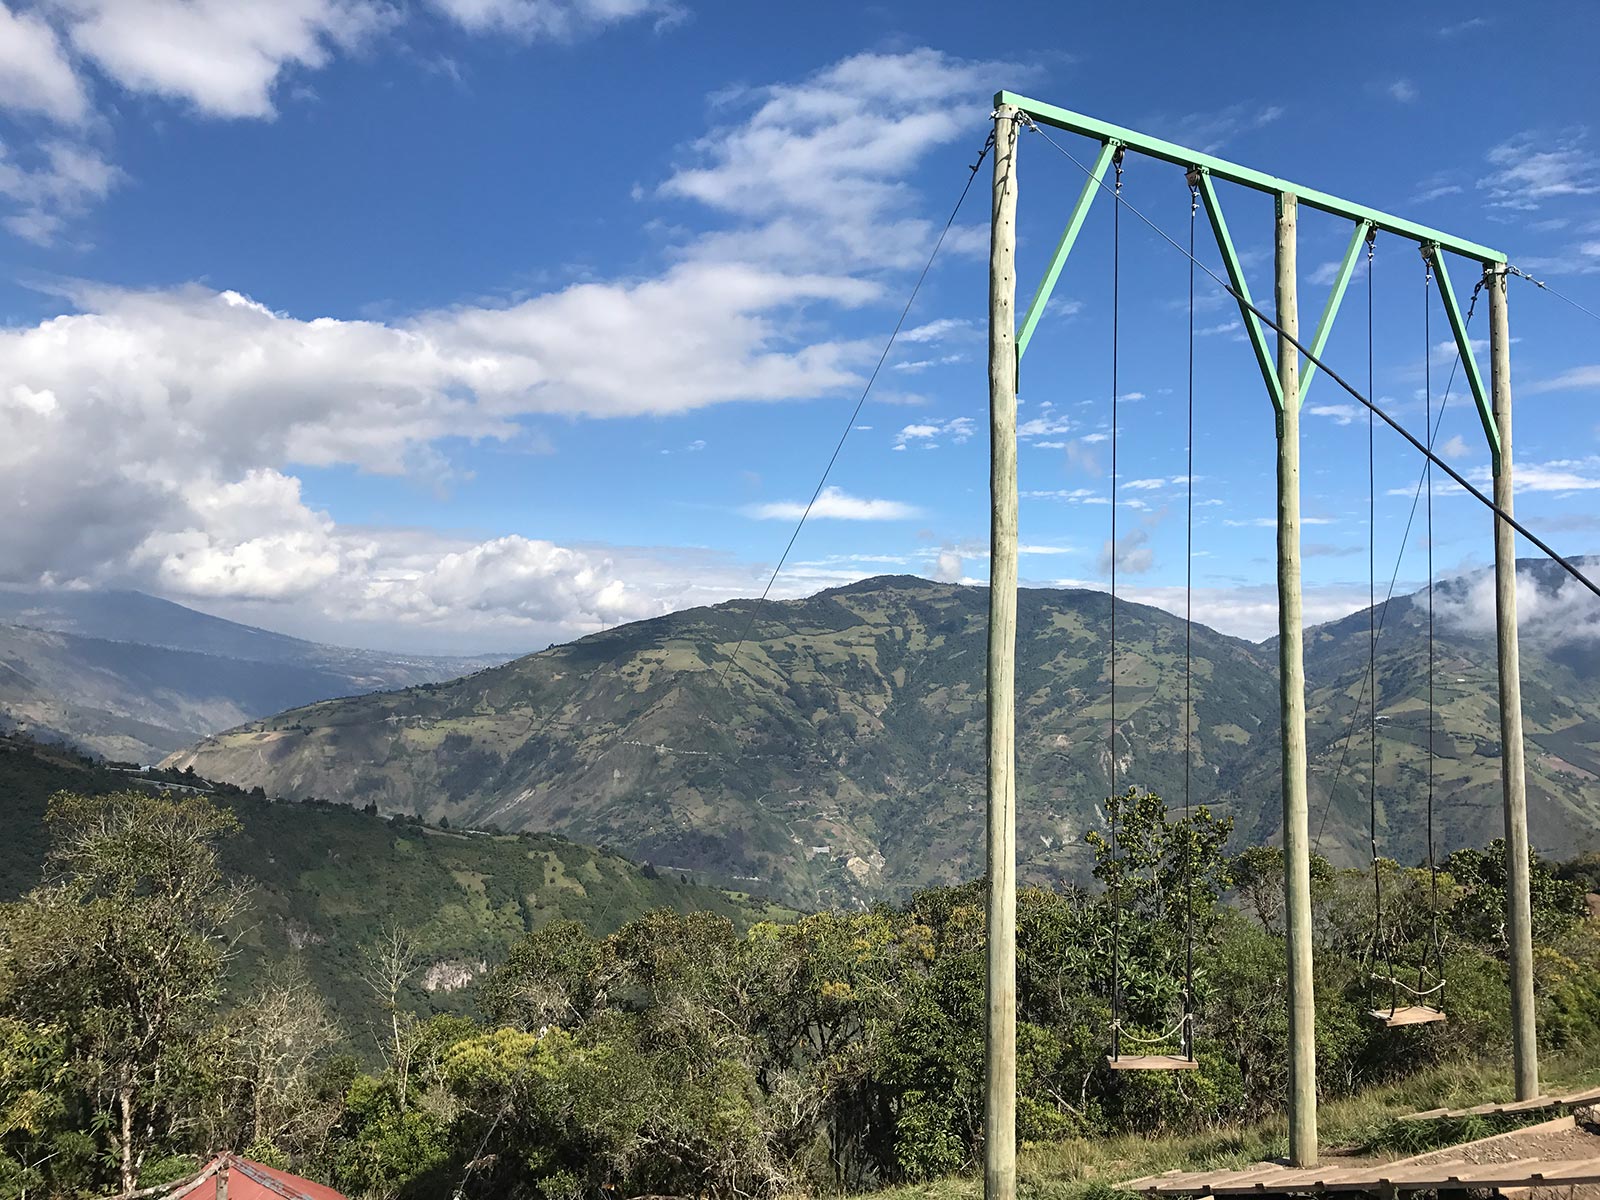 The swing at the end of the world in Banôs, Ecuador. A Swing, The Equator & needing the Banôs in Banôs